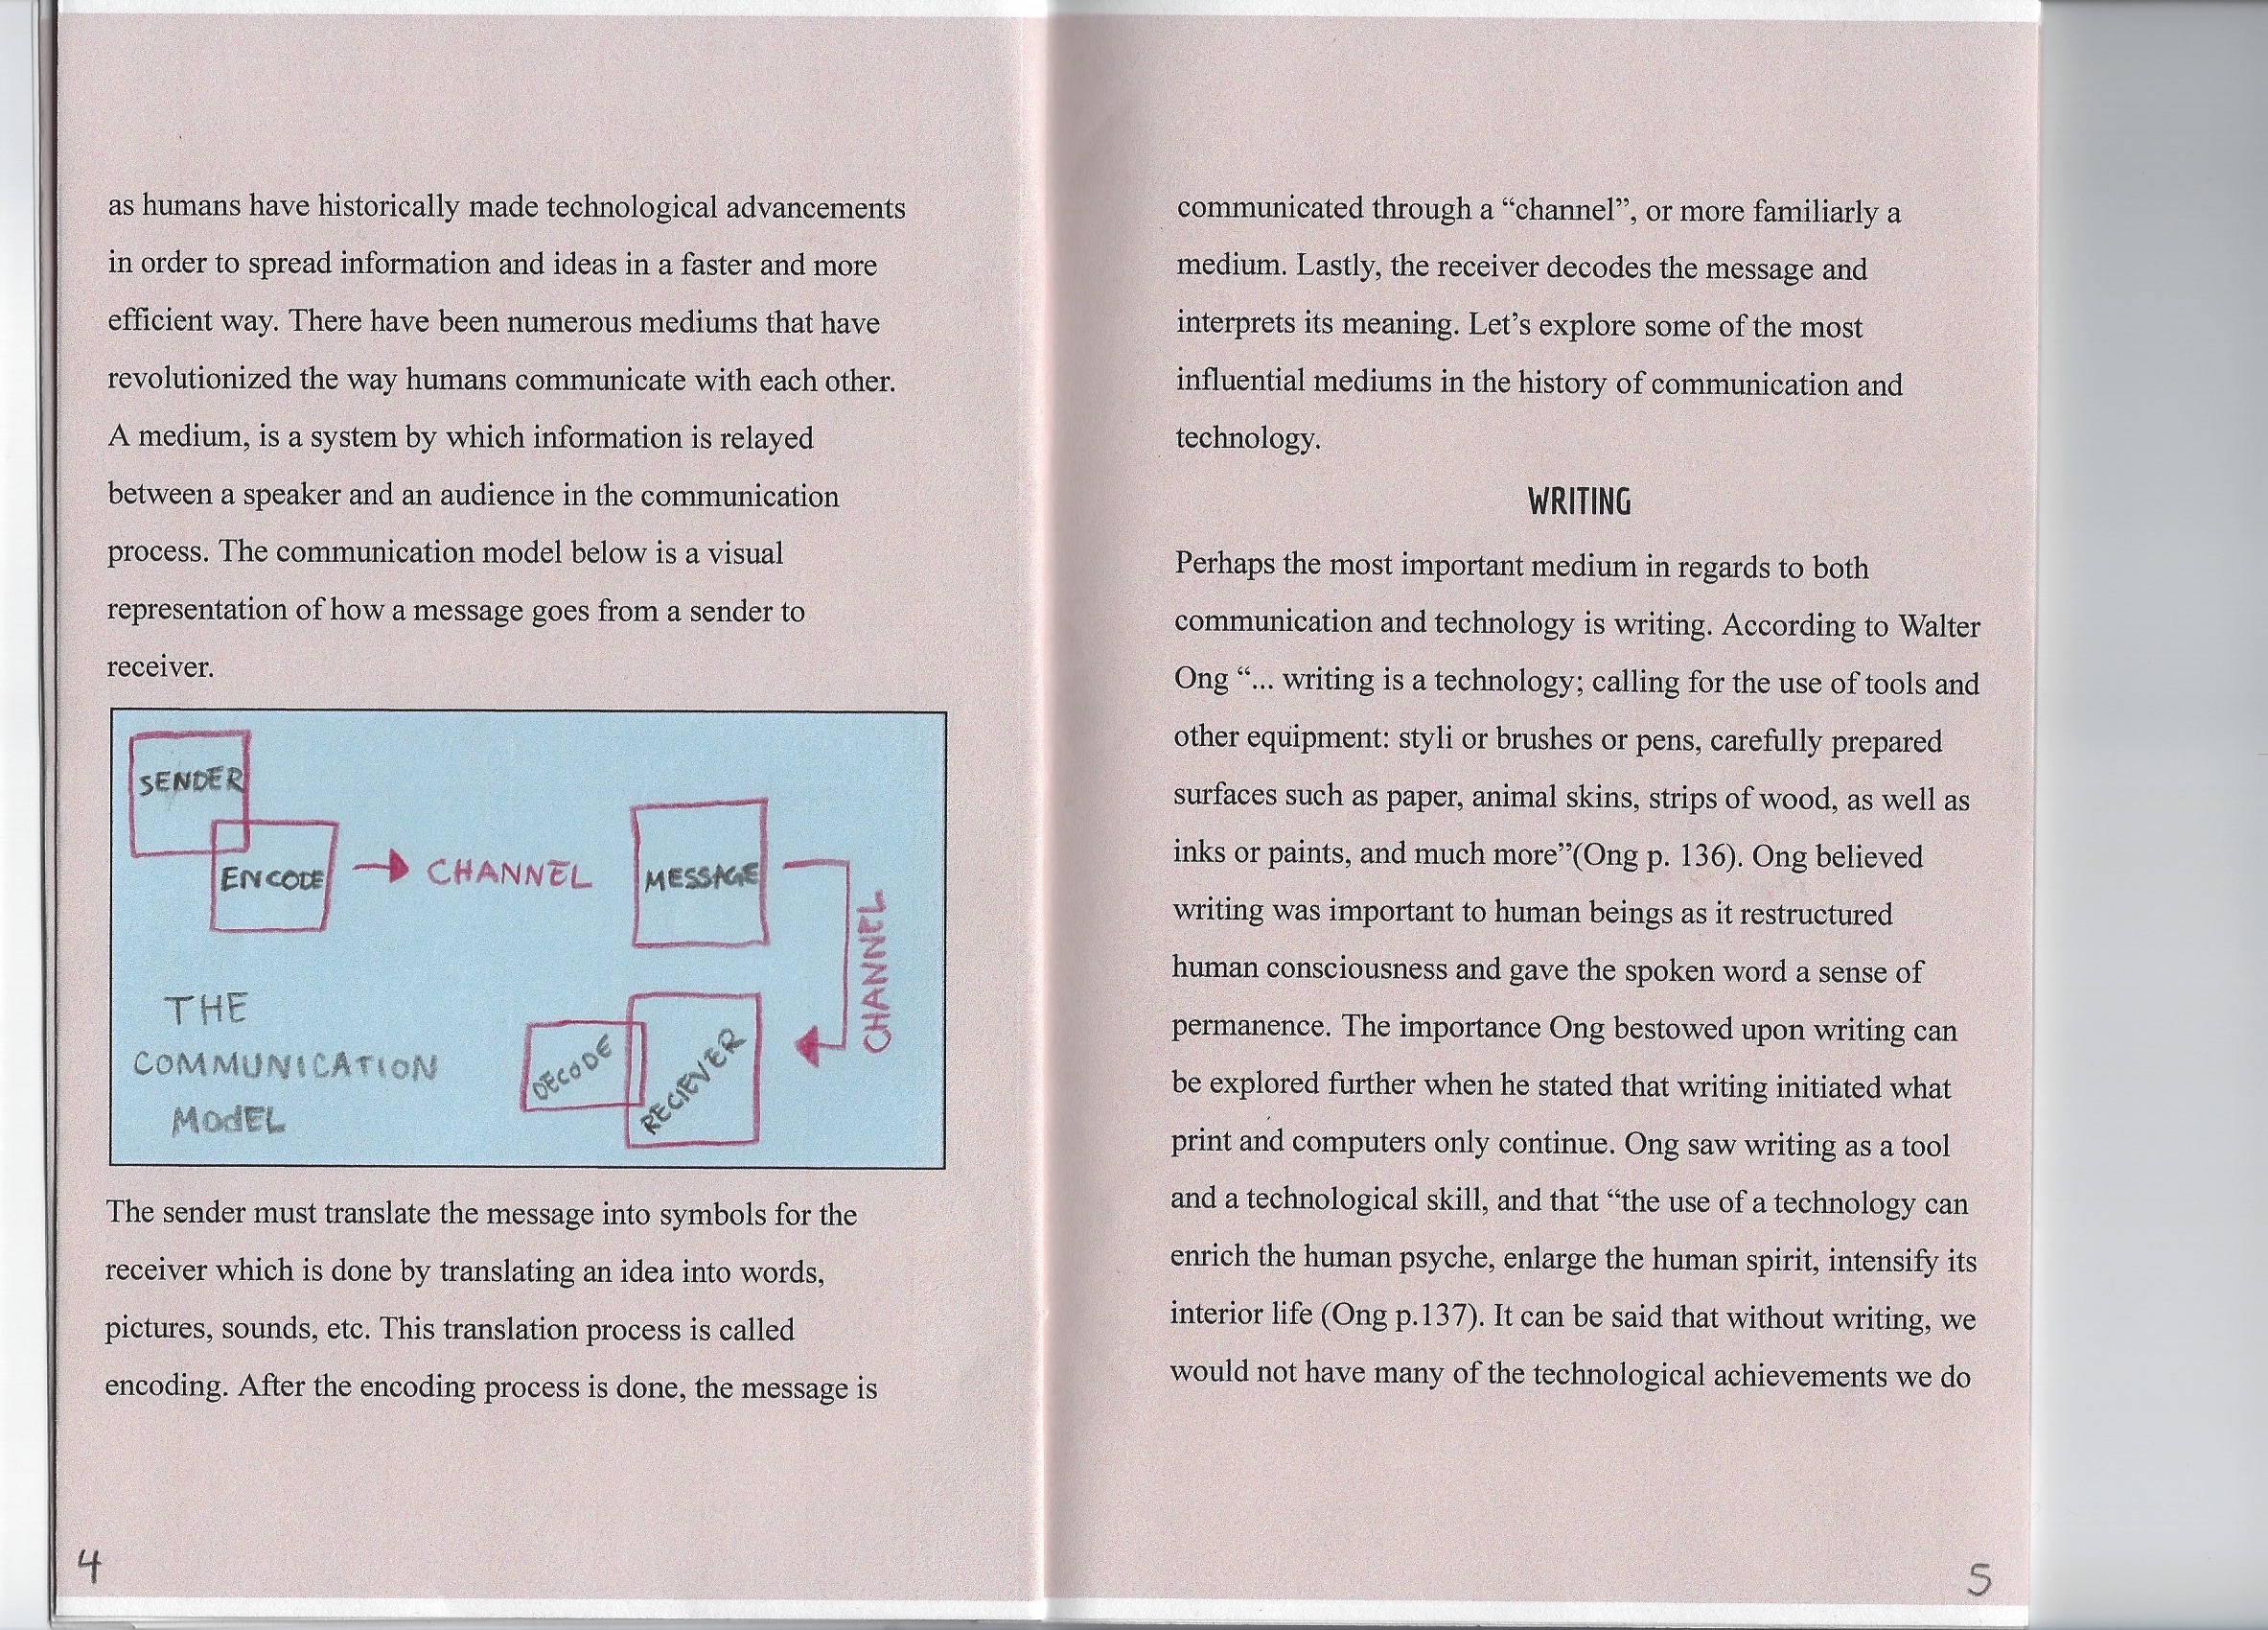 Page 4: This page continues the concept of mediums and includes a diagram of the communication model. Page 5: A page introducing the topic of writing.